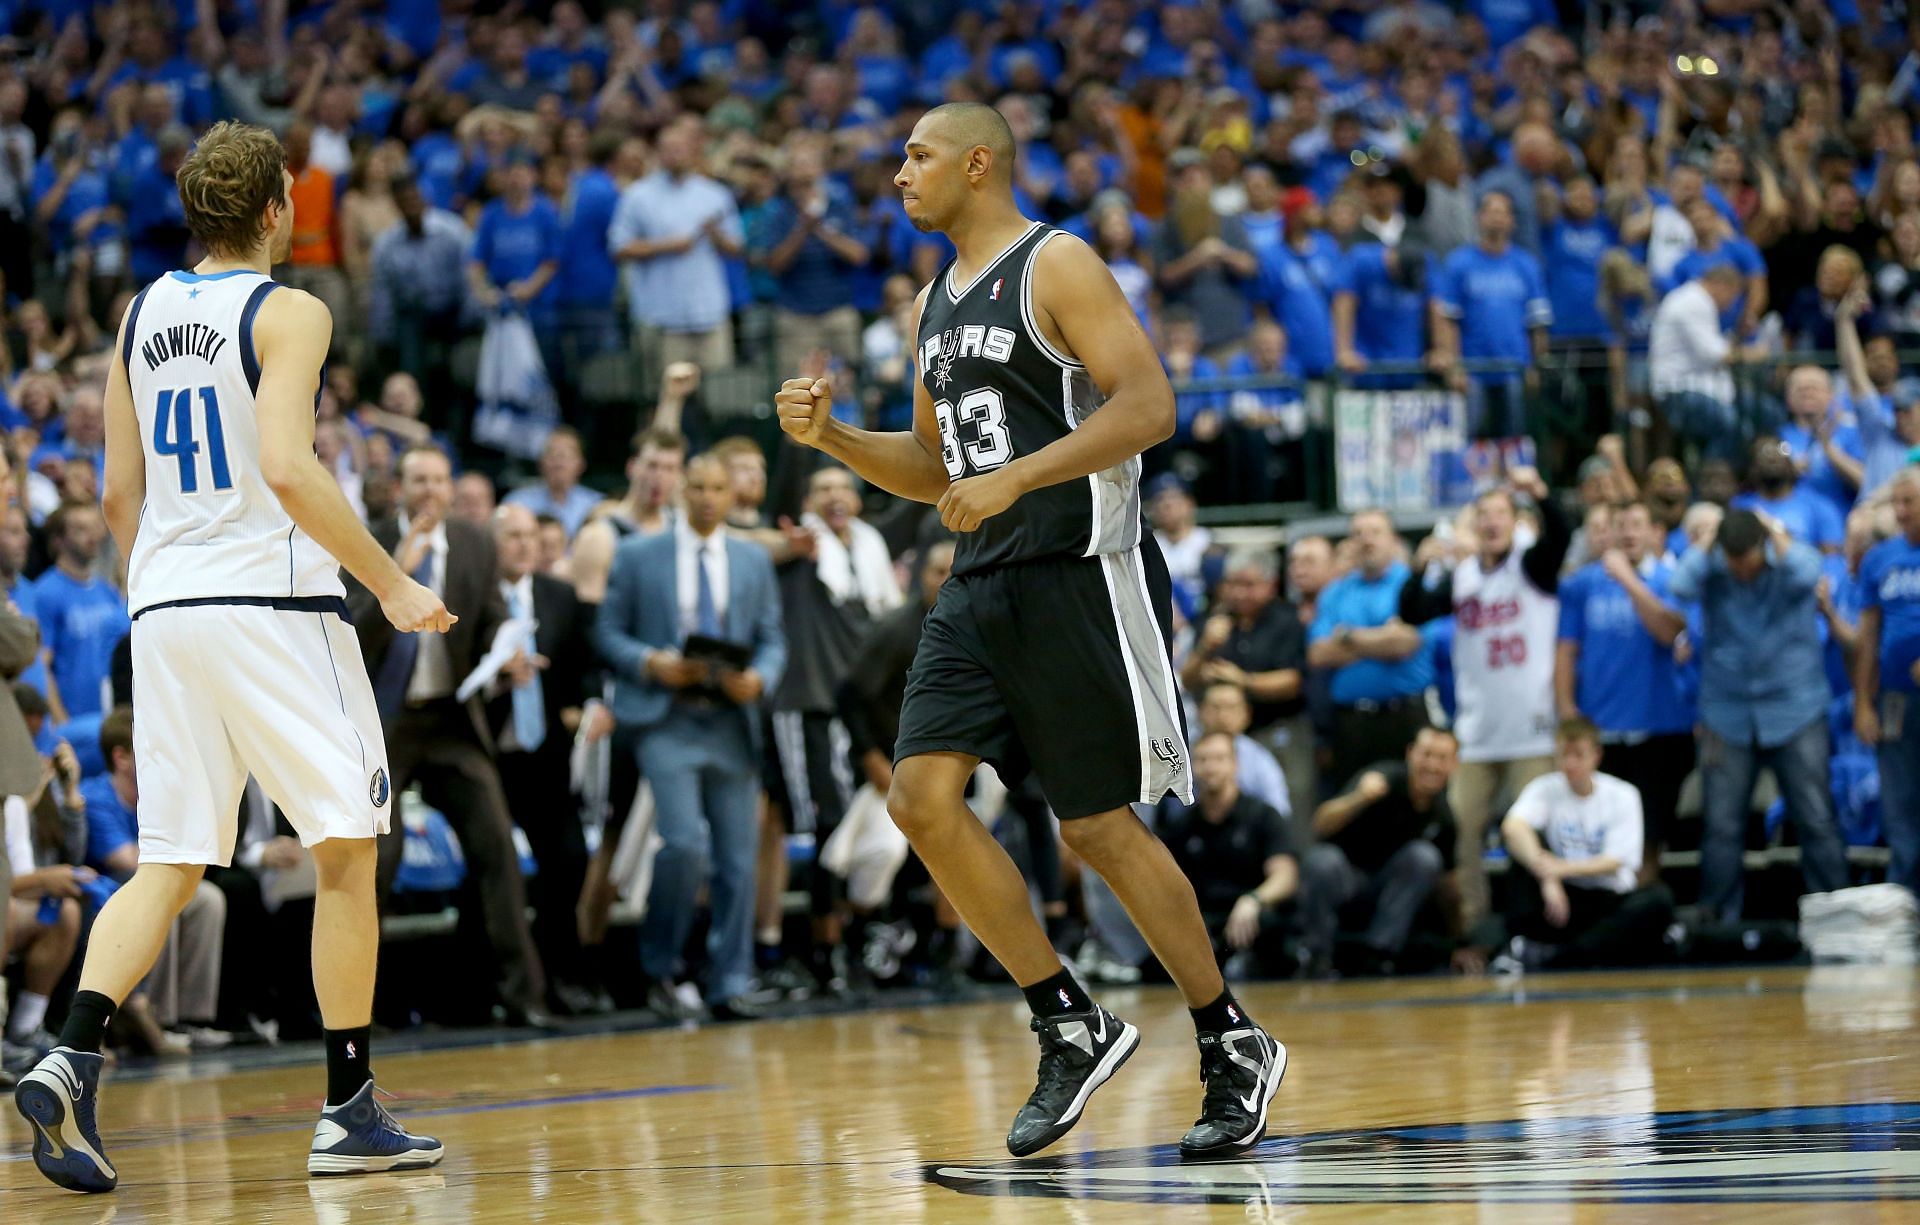 Boris Diaw won it all with the Spurs in 2014 (Image via Getty Images)